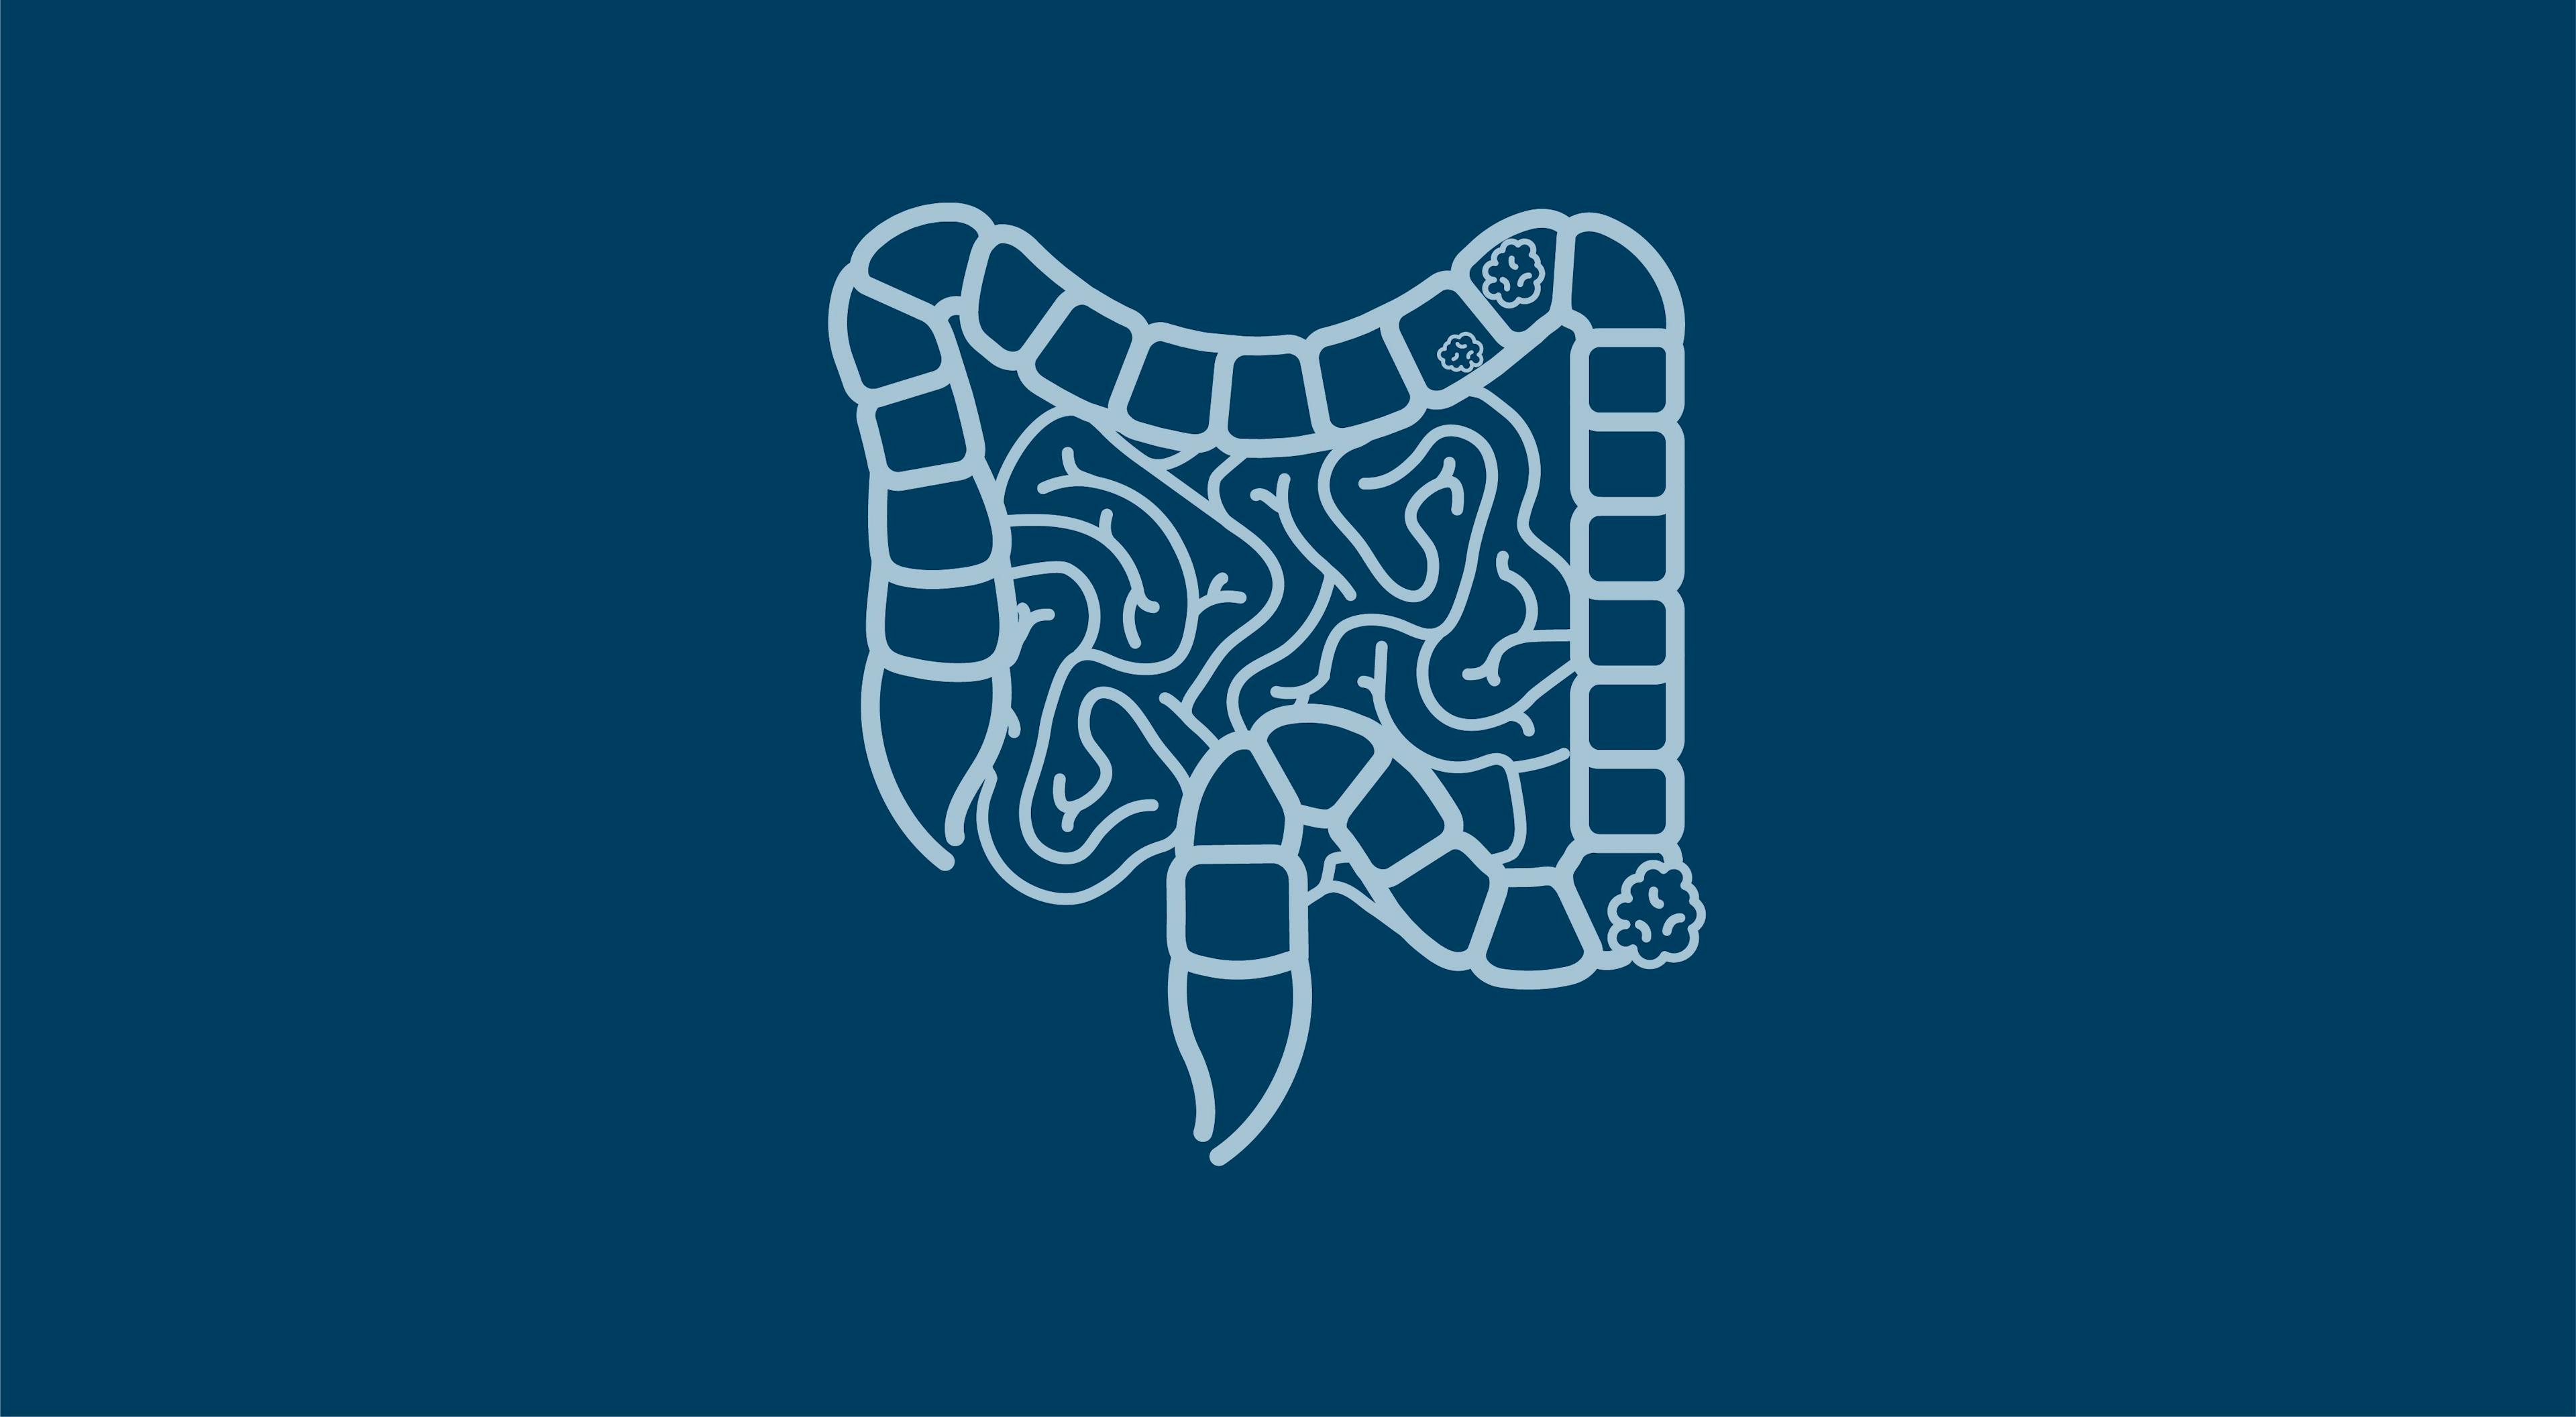 Endoscopies for Women 50 Years or Younger Reduce Colorectal Cancer Risk